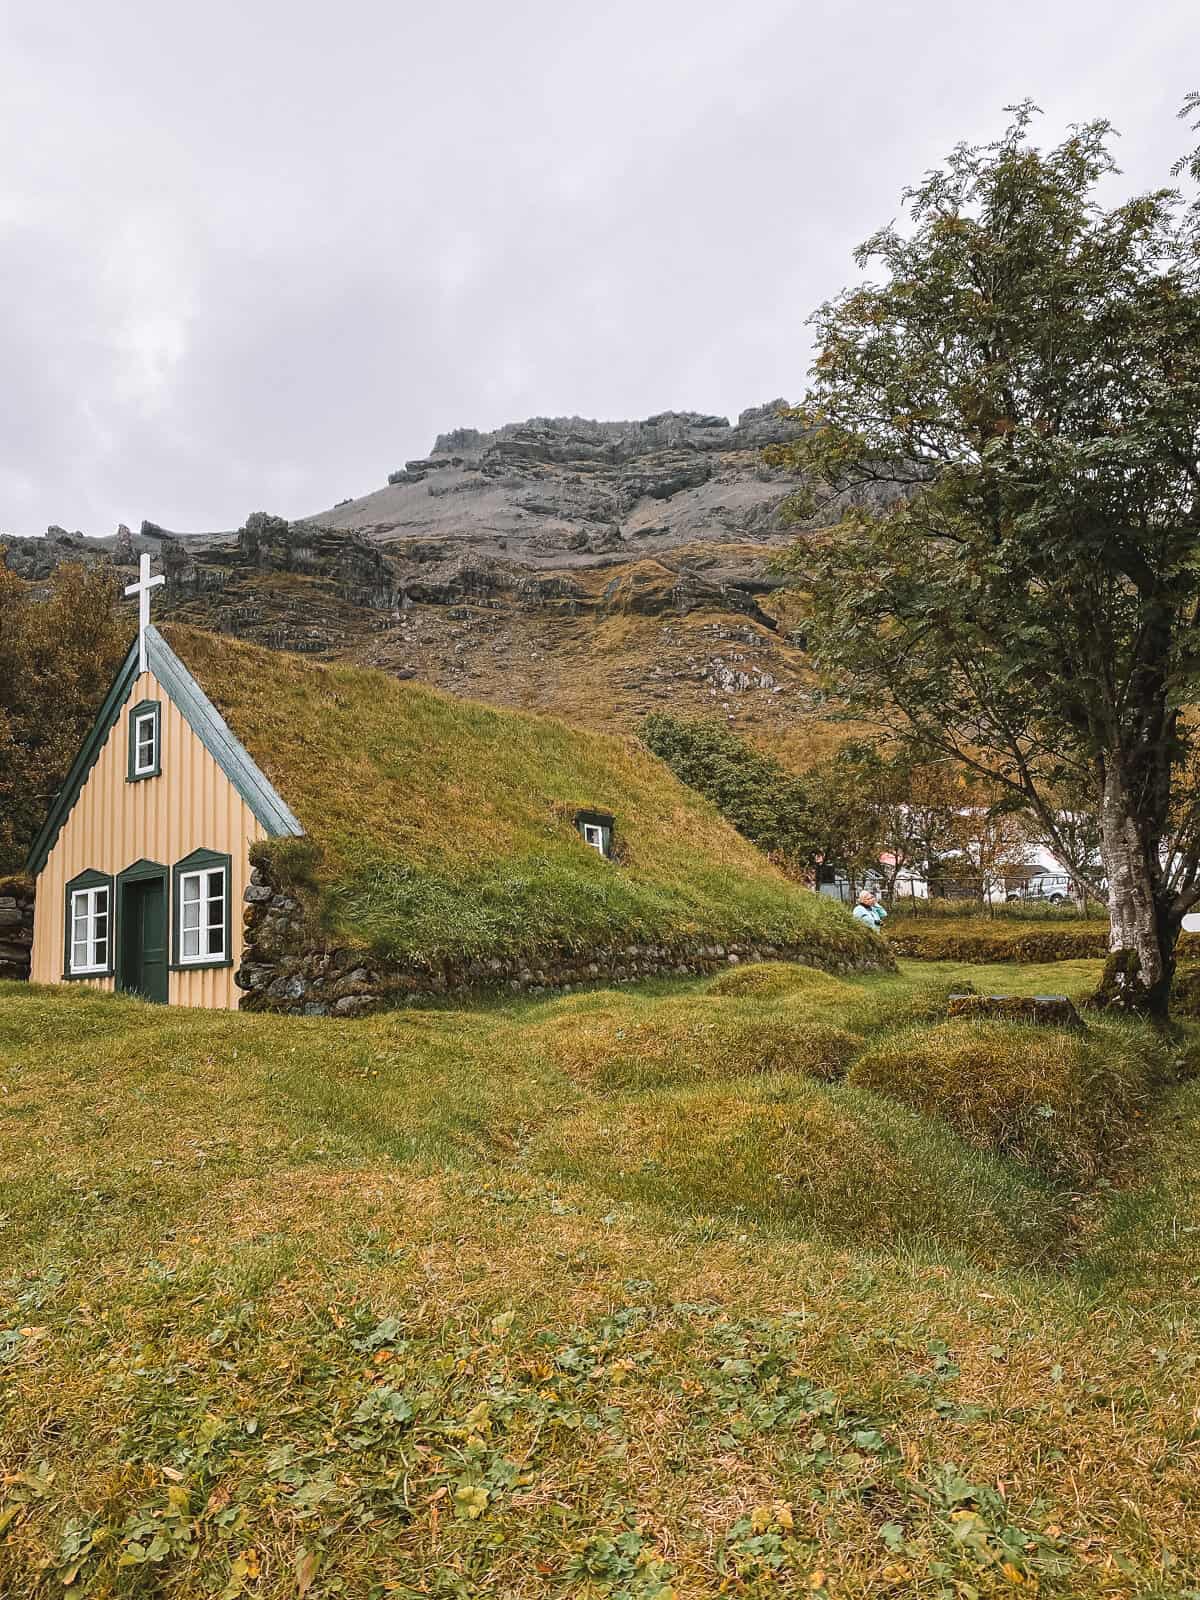 A traditional Icelandic turf church with a green roof, nestled against a backdrop of rugged mountains, portraying the quaint charm and symbiosis with nature characteristic of Icelandic architecture.